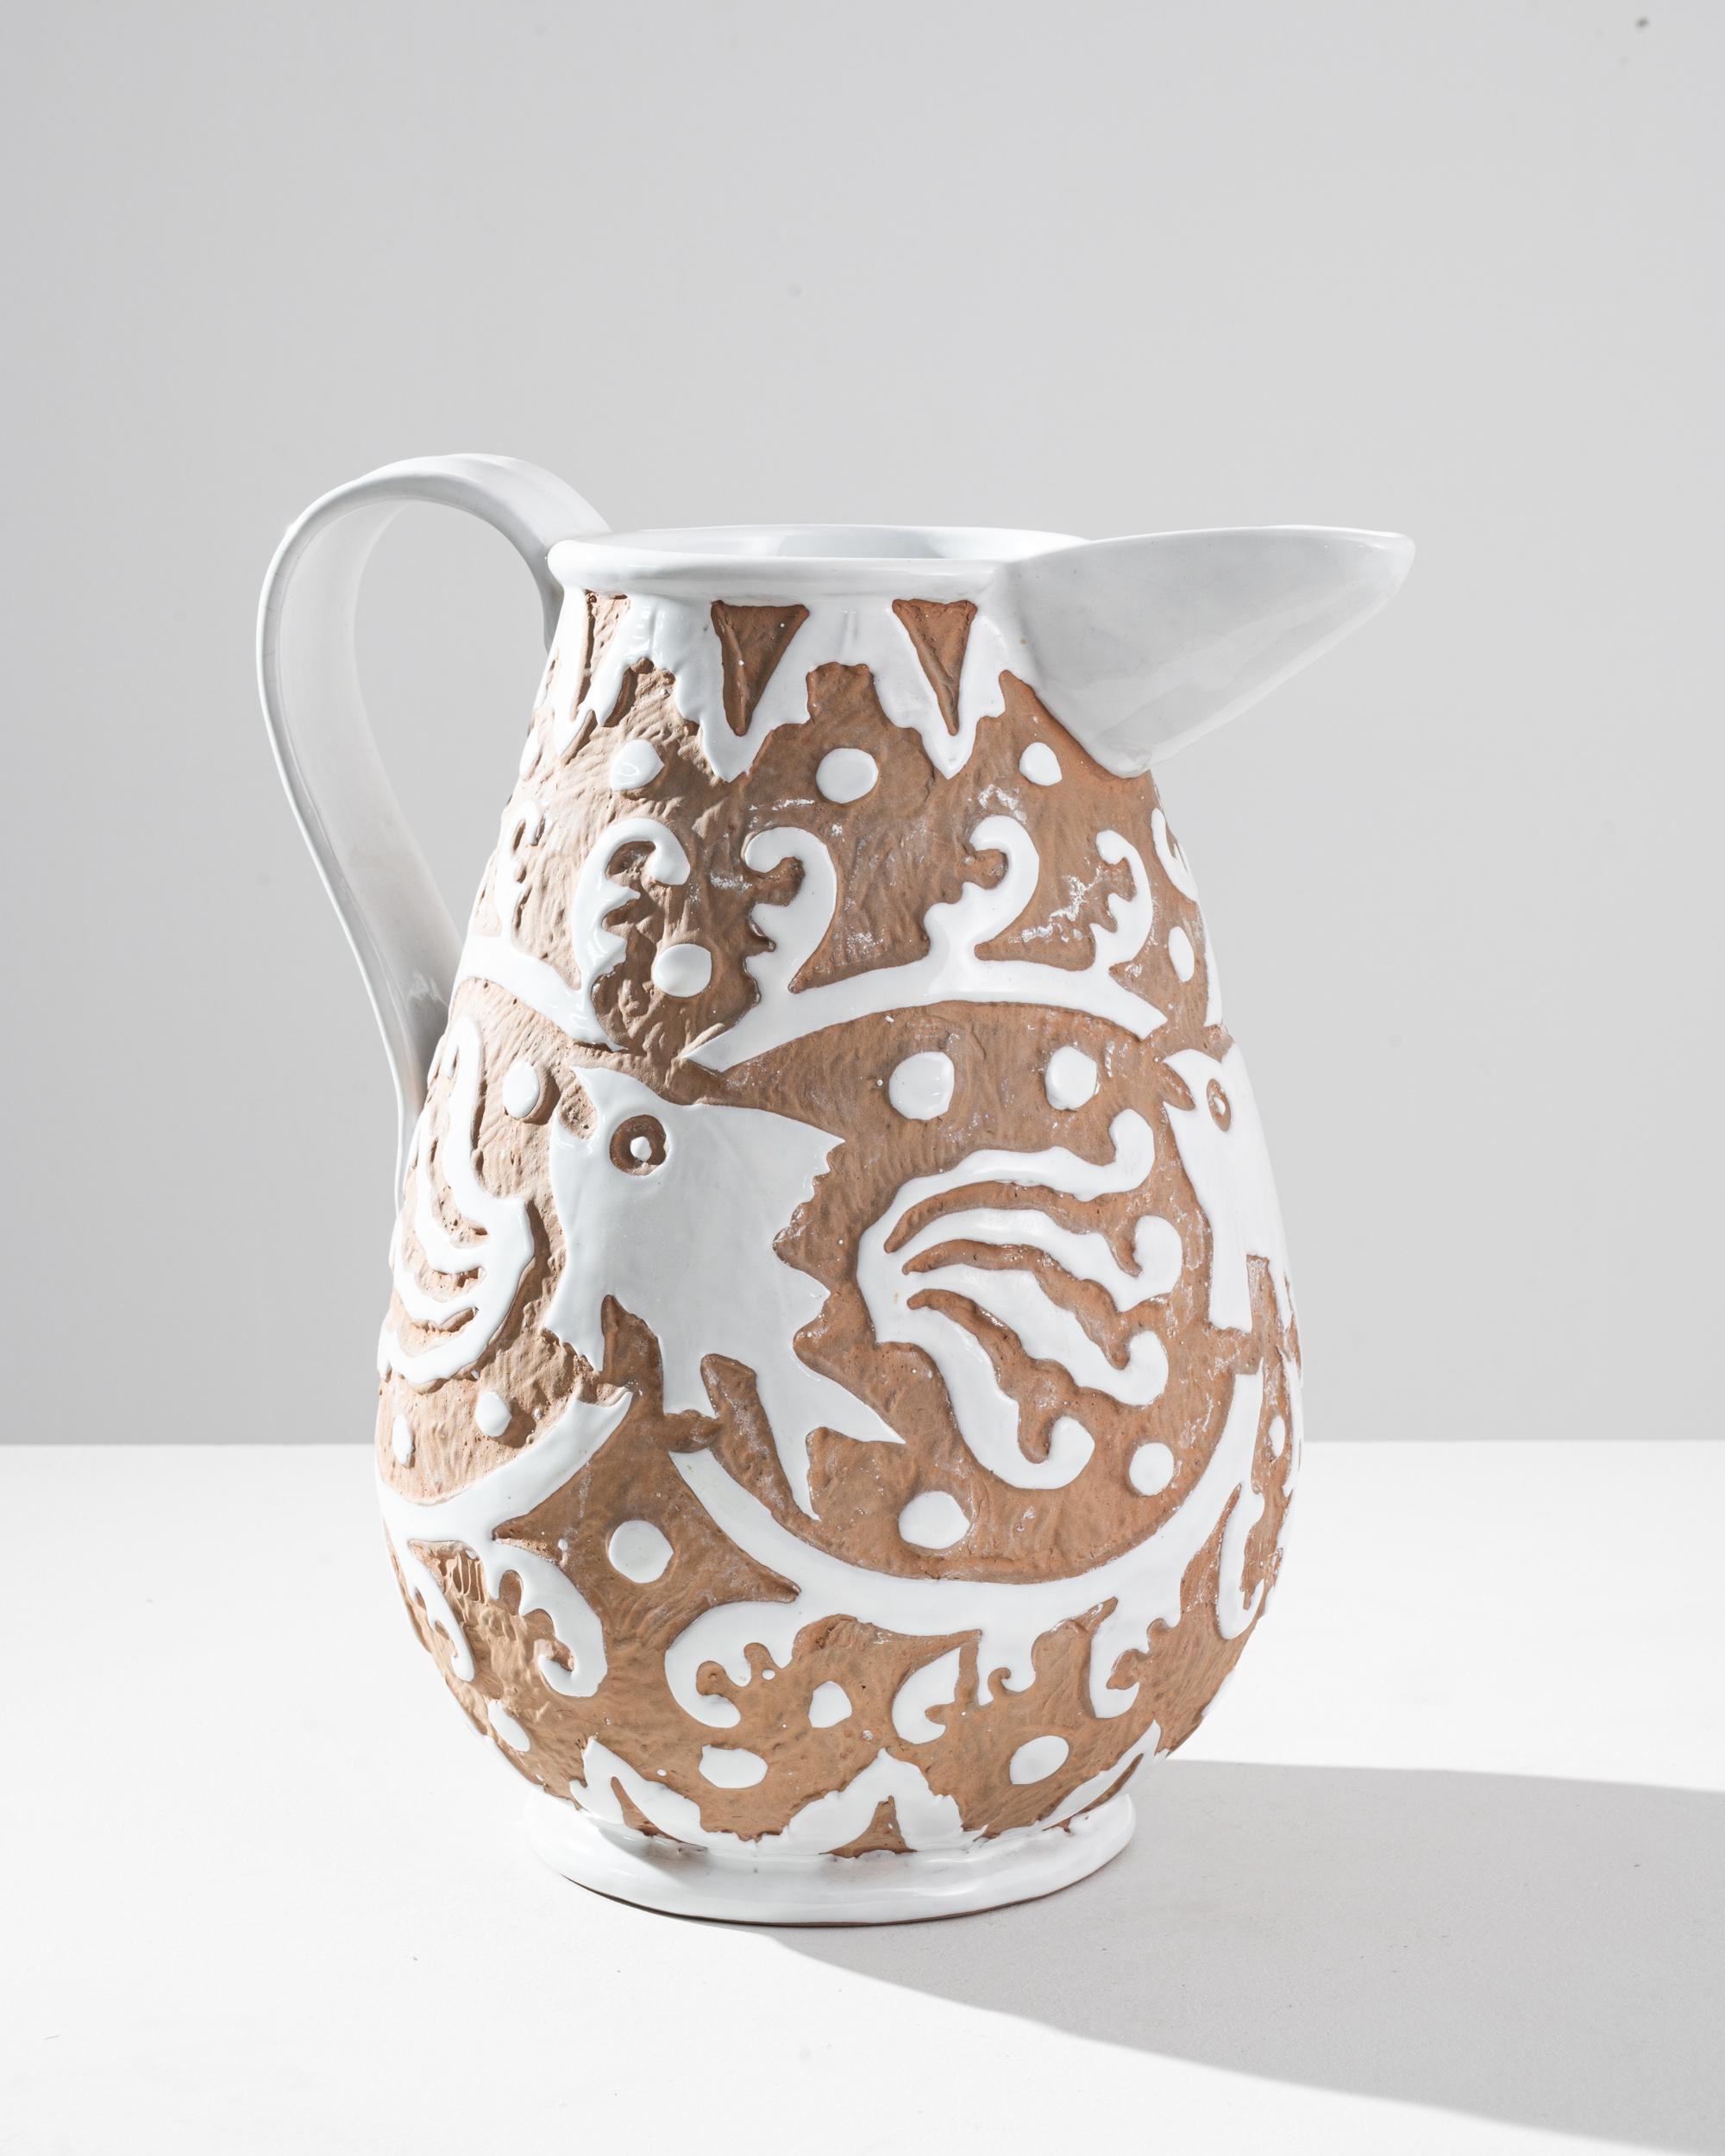 This vintage ceramic jug combines rustic simplicity with decorative charm. Made in France in the 1960s, an intricate country design stands out in white relief against a textural, terra-cotta colored background: it depicts a stylized fish, leaping